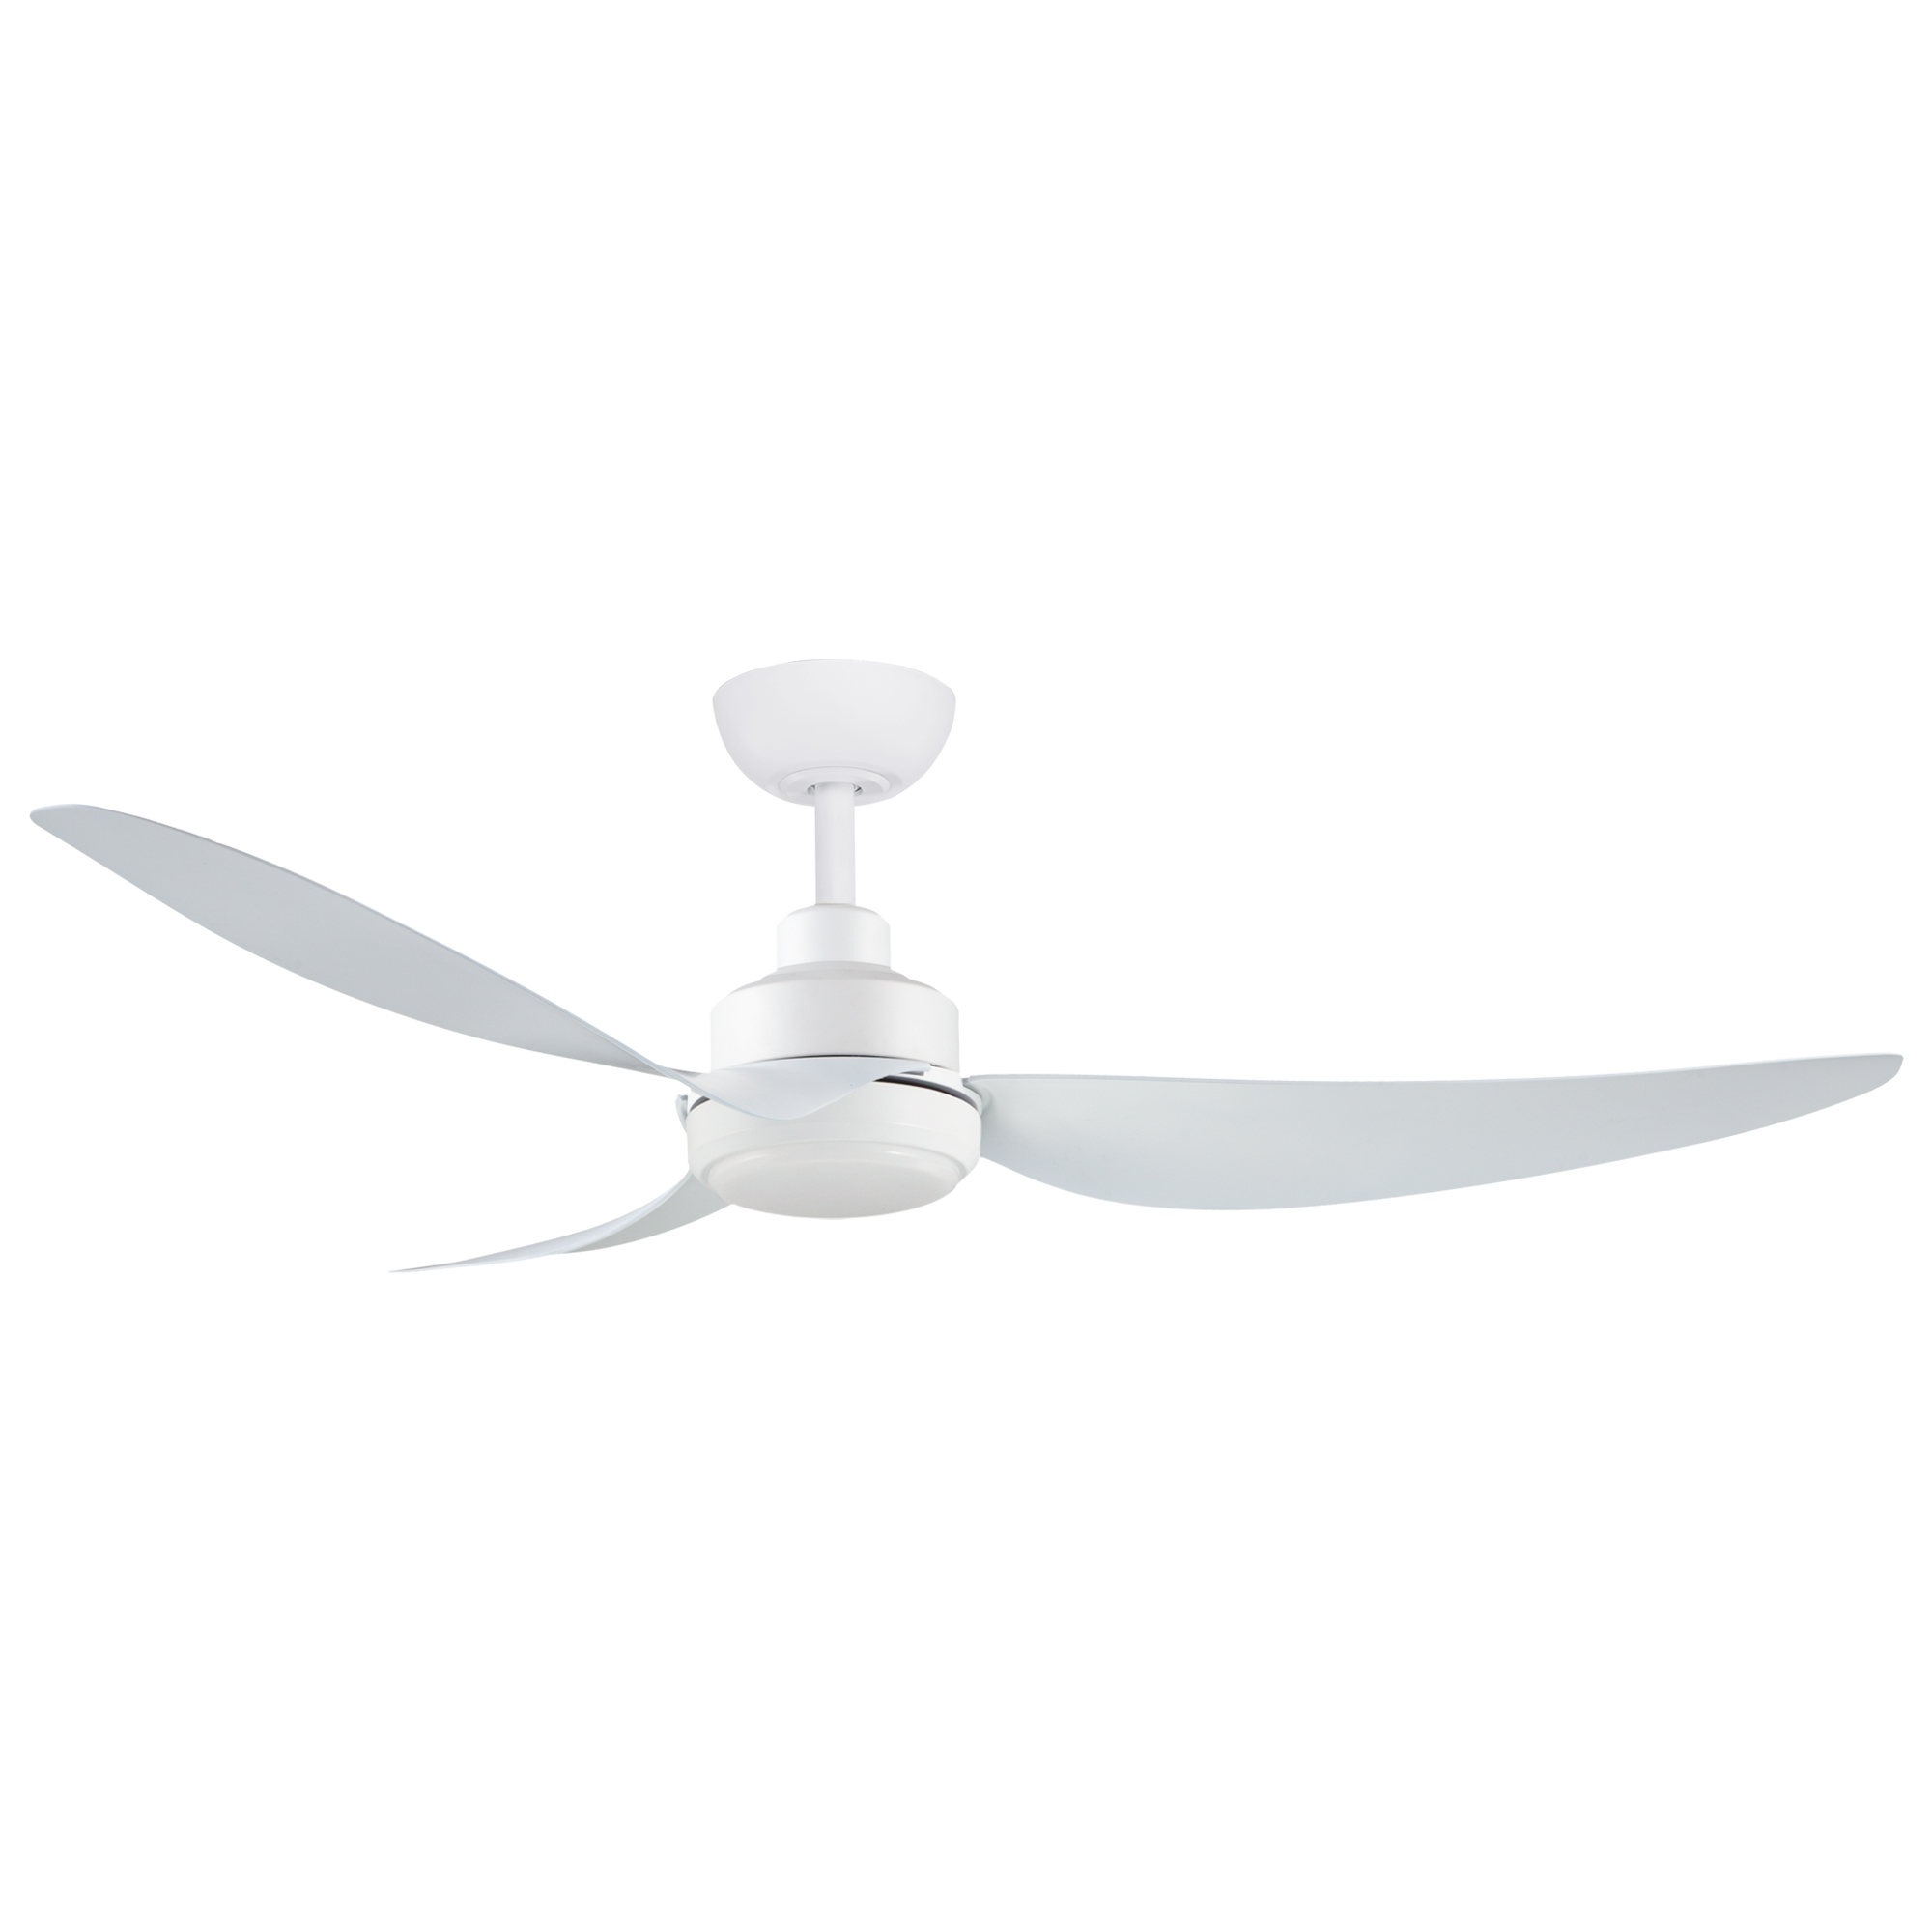 56" Trinity DC Ceiling Fan in Matte White with 20W LED Light